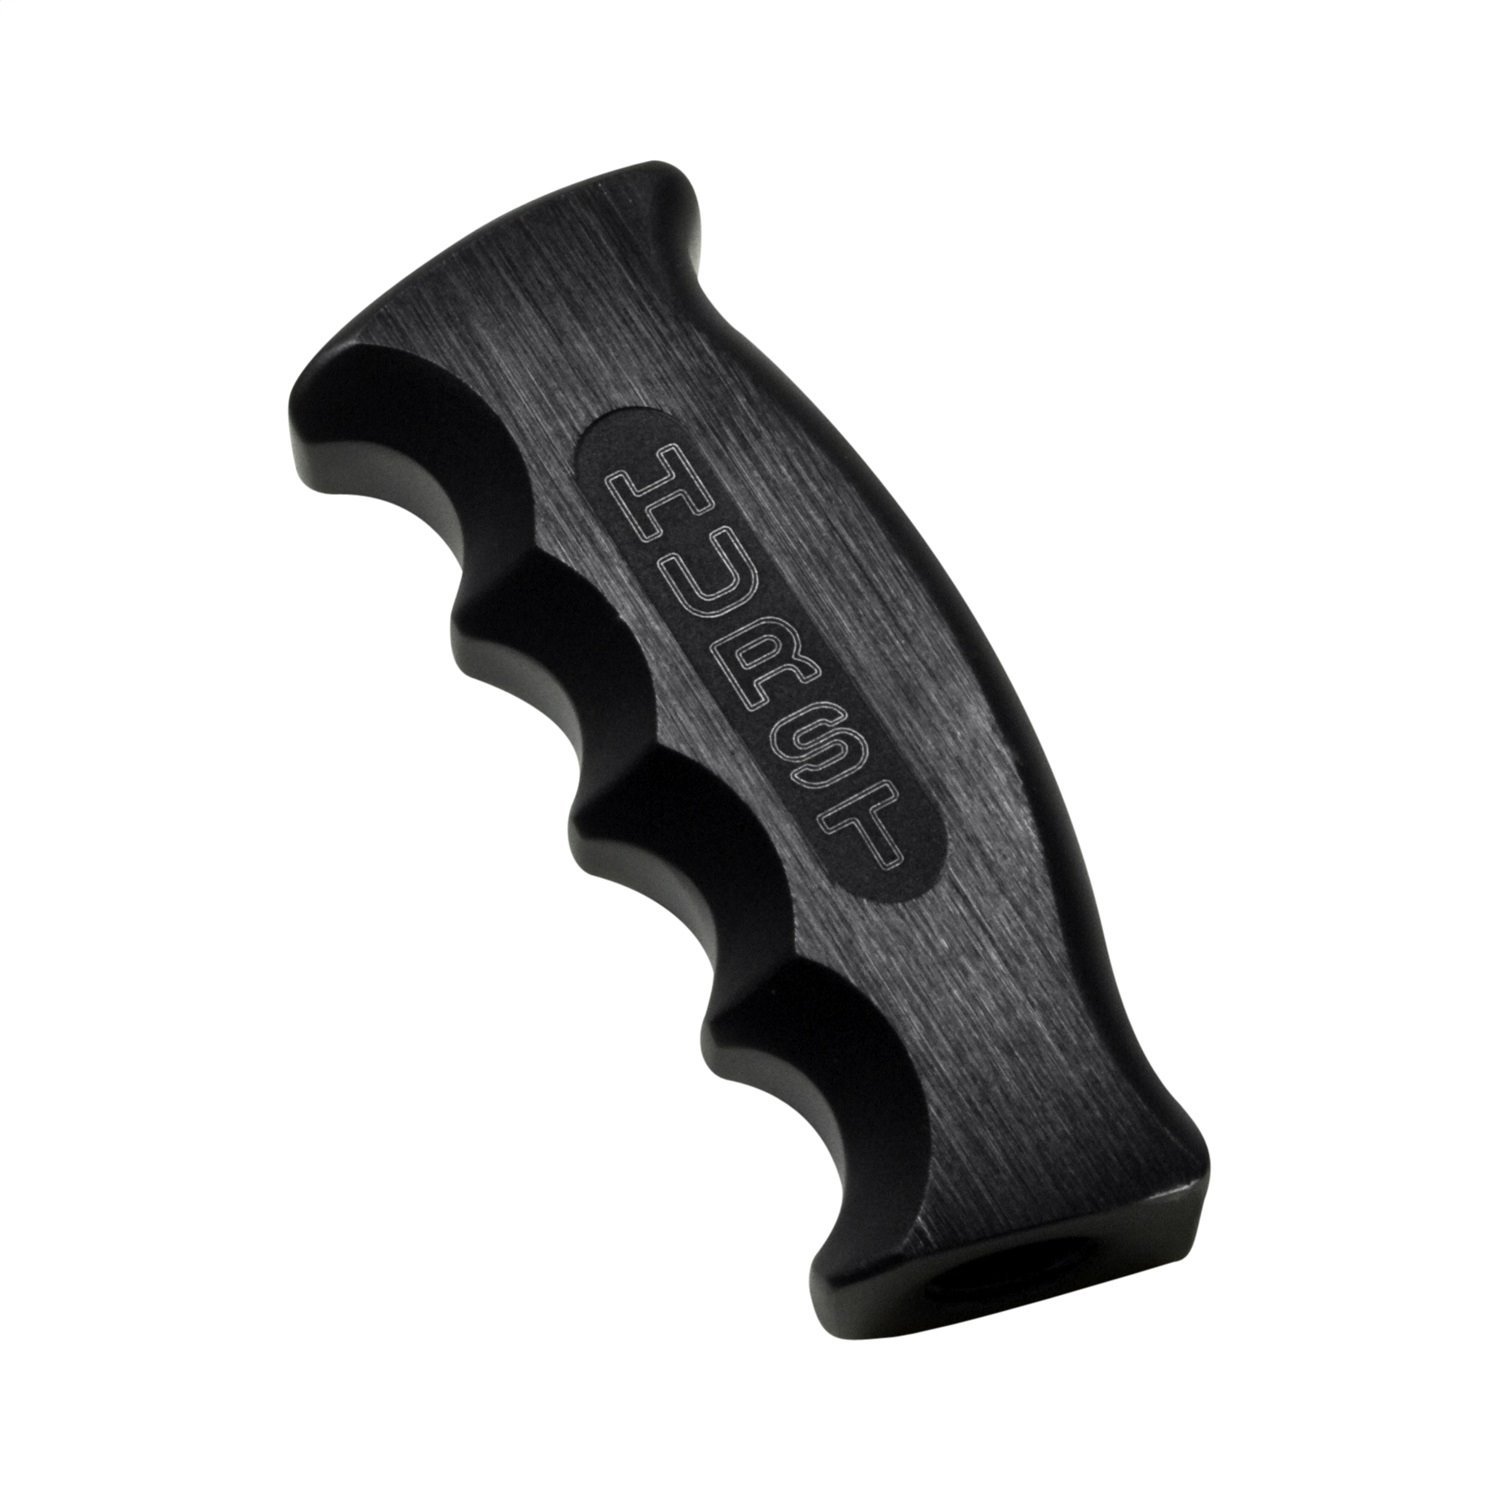 Pistol Grip Handle Black Anodized Finish 12mm x 1.75 Mustang